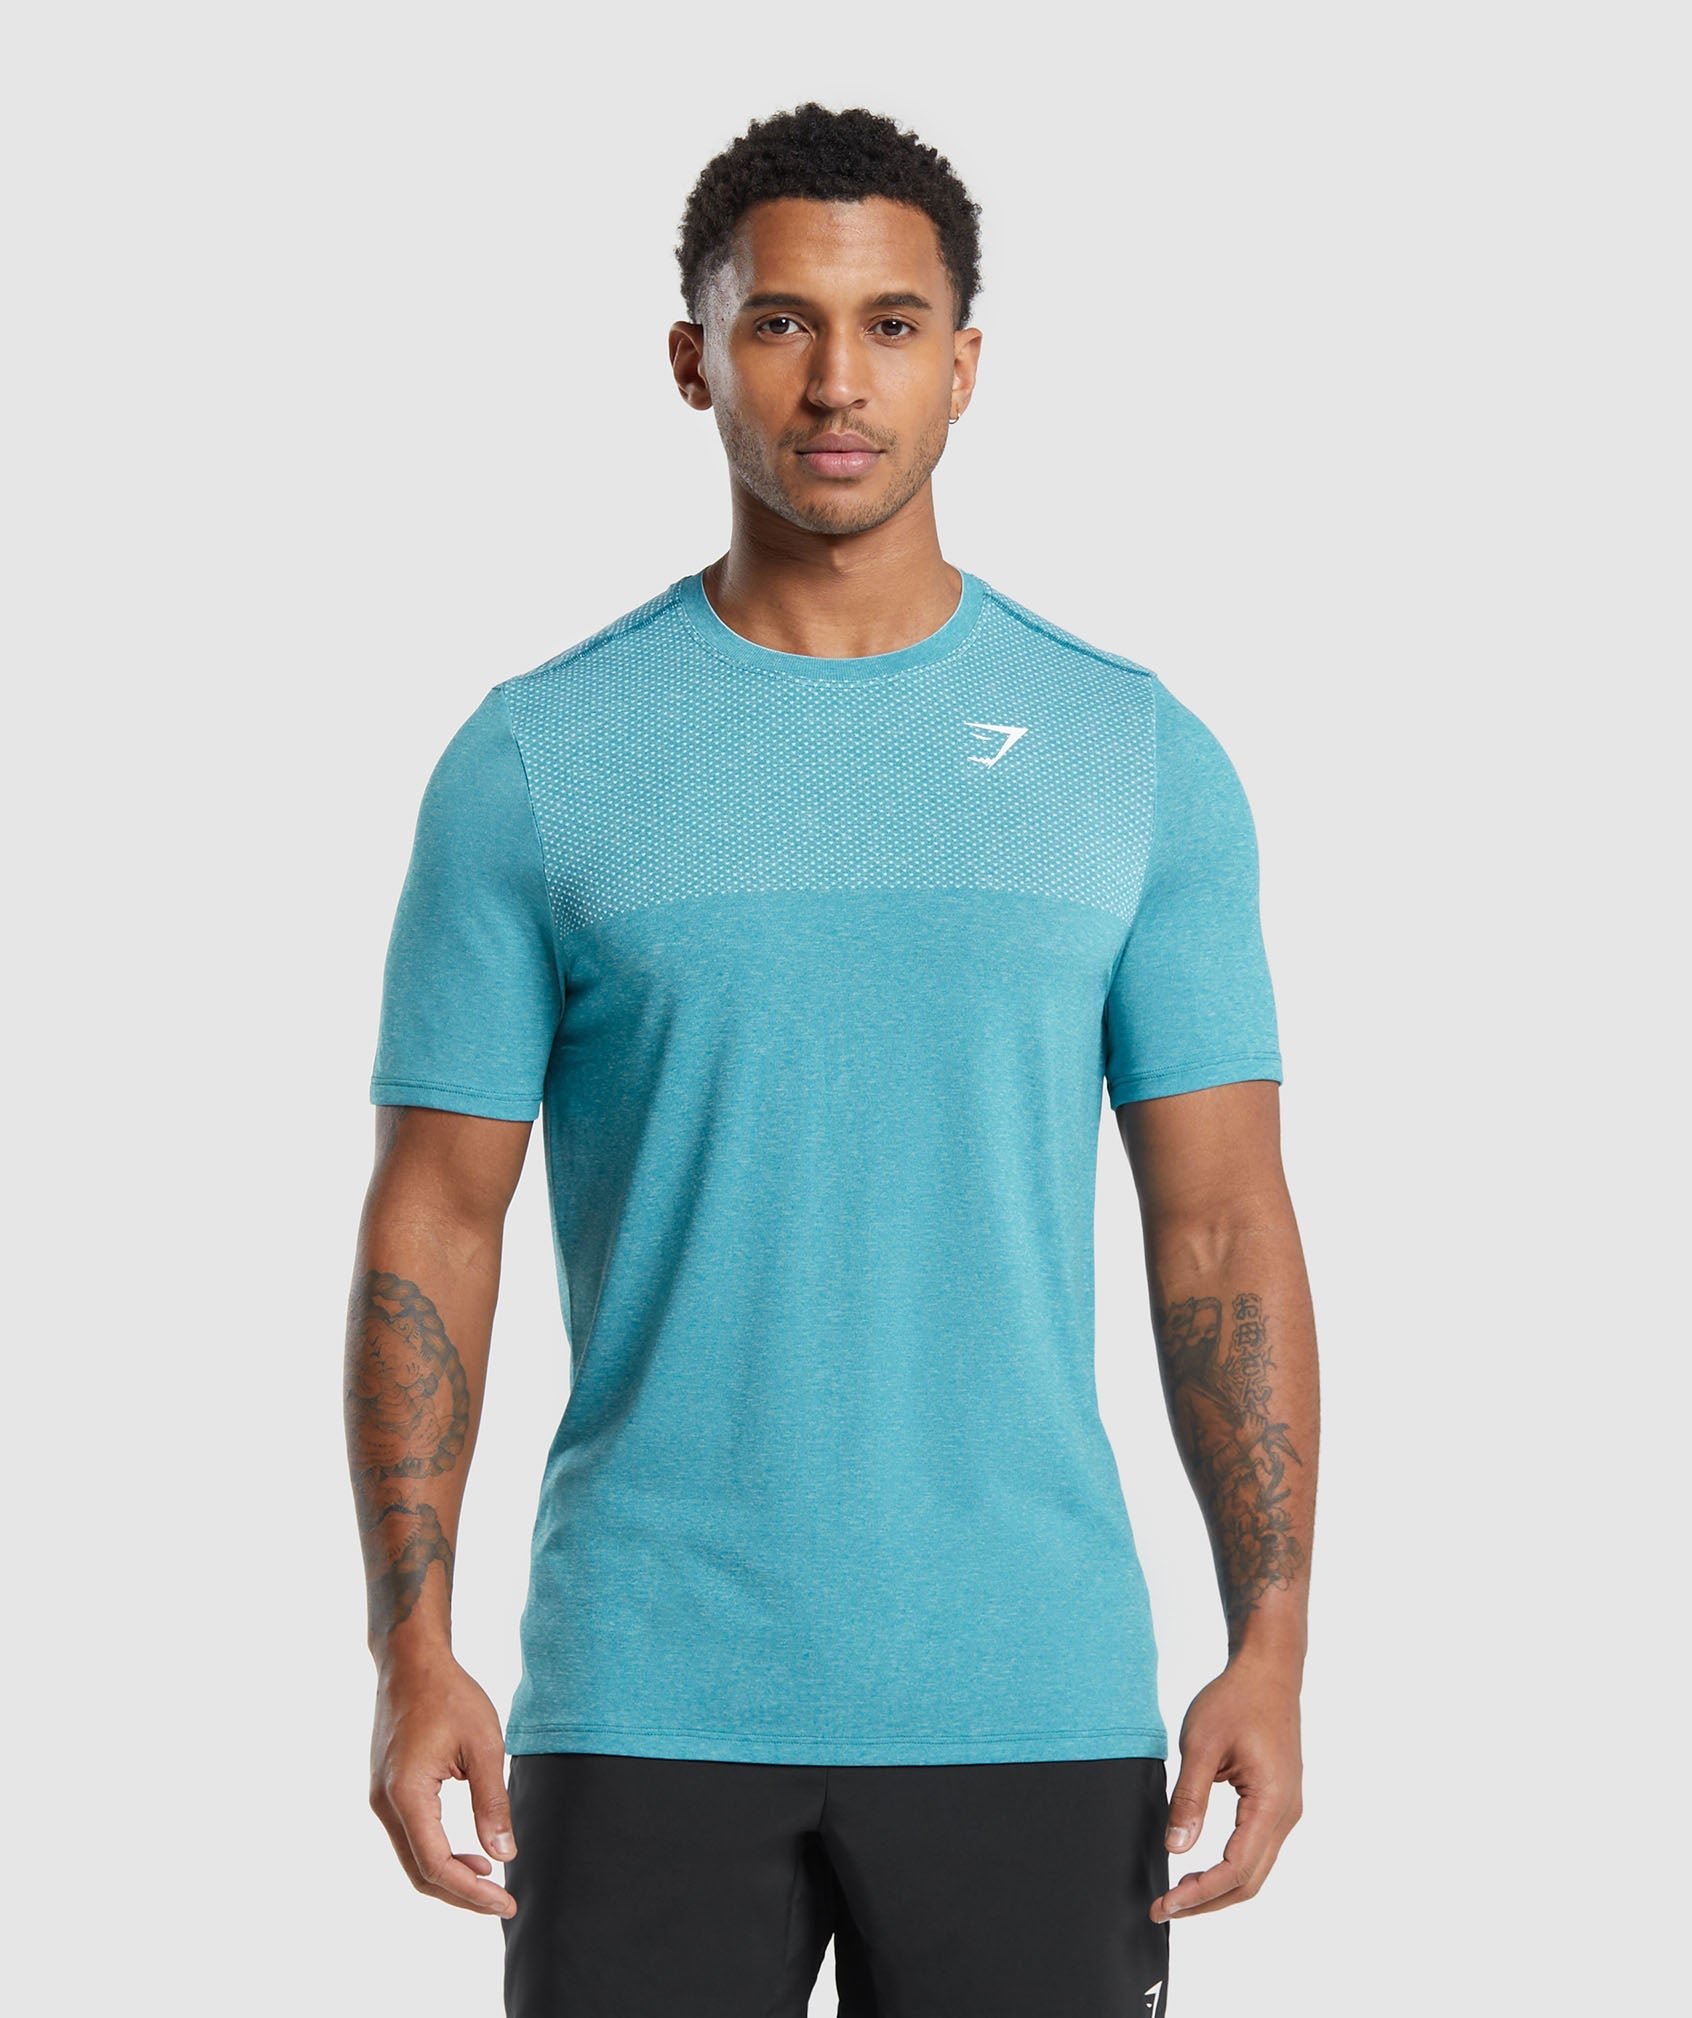 Vital Seamless T-Shirt in Artificial Teal/White Marl - view 1